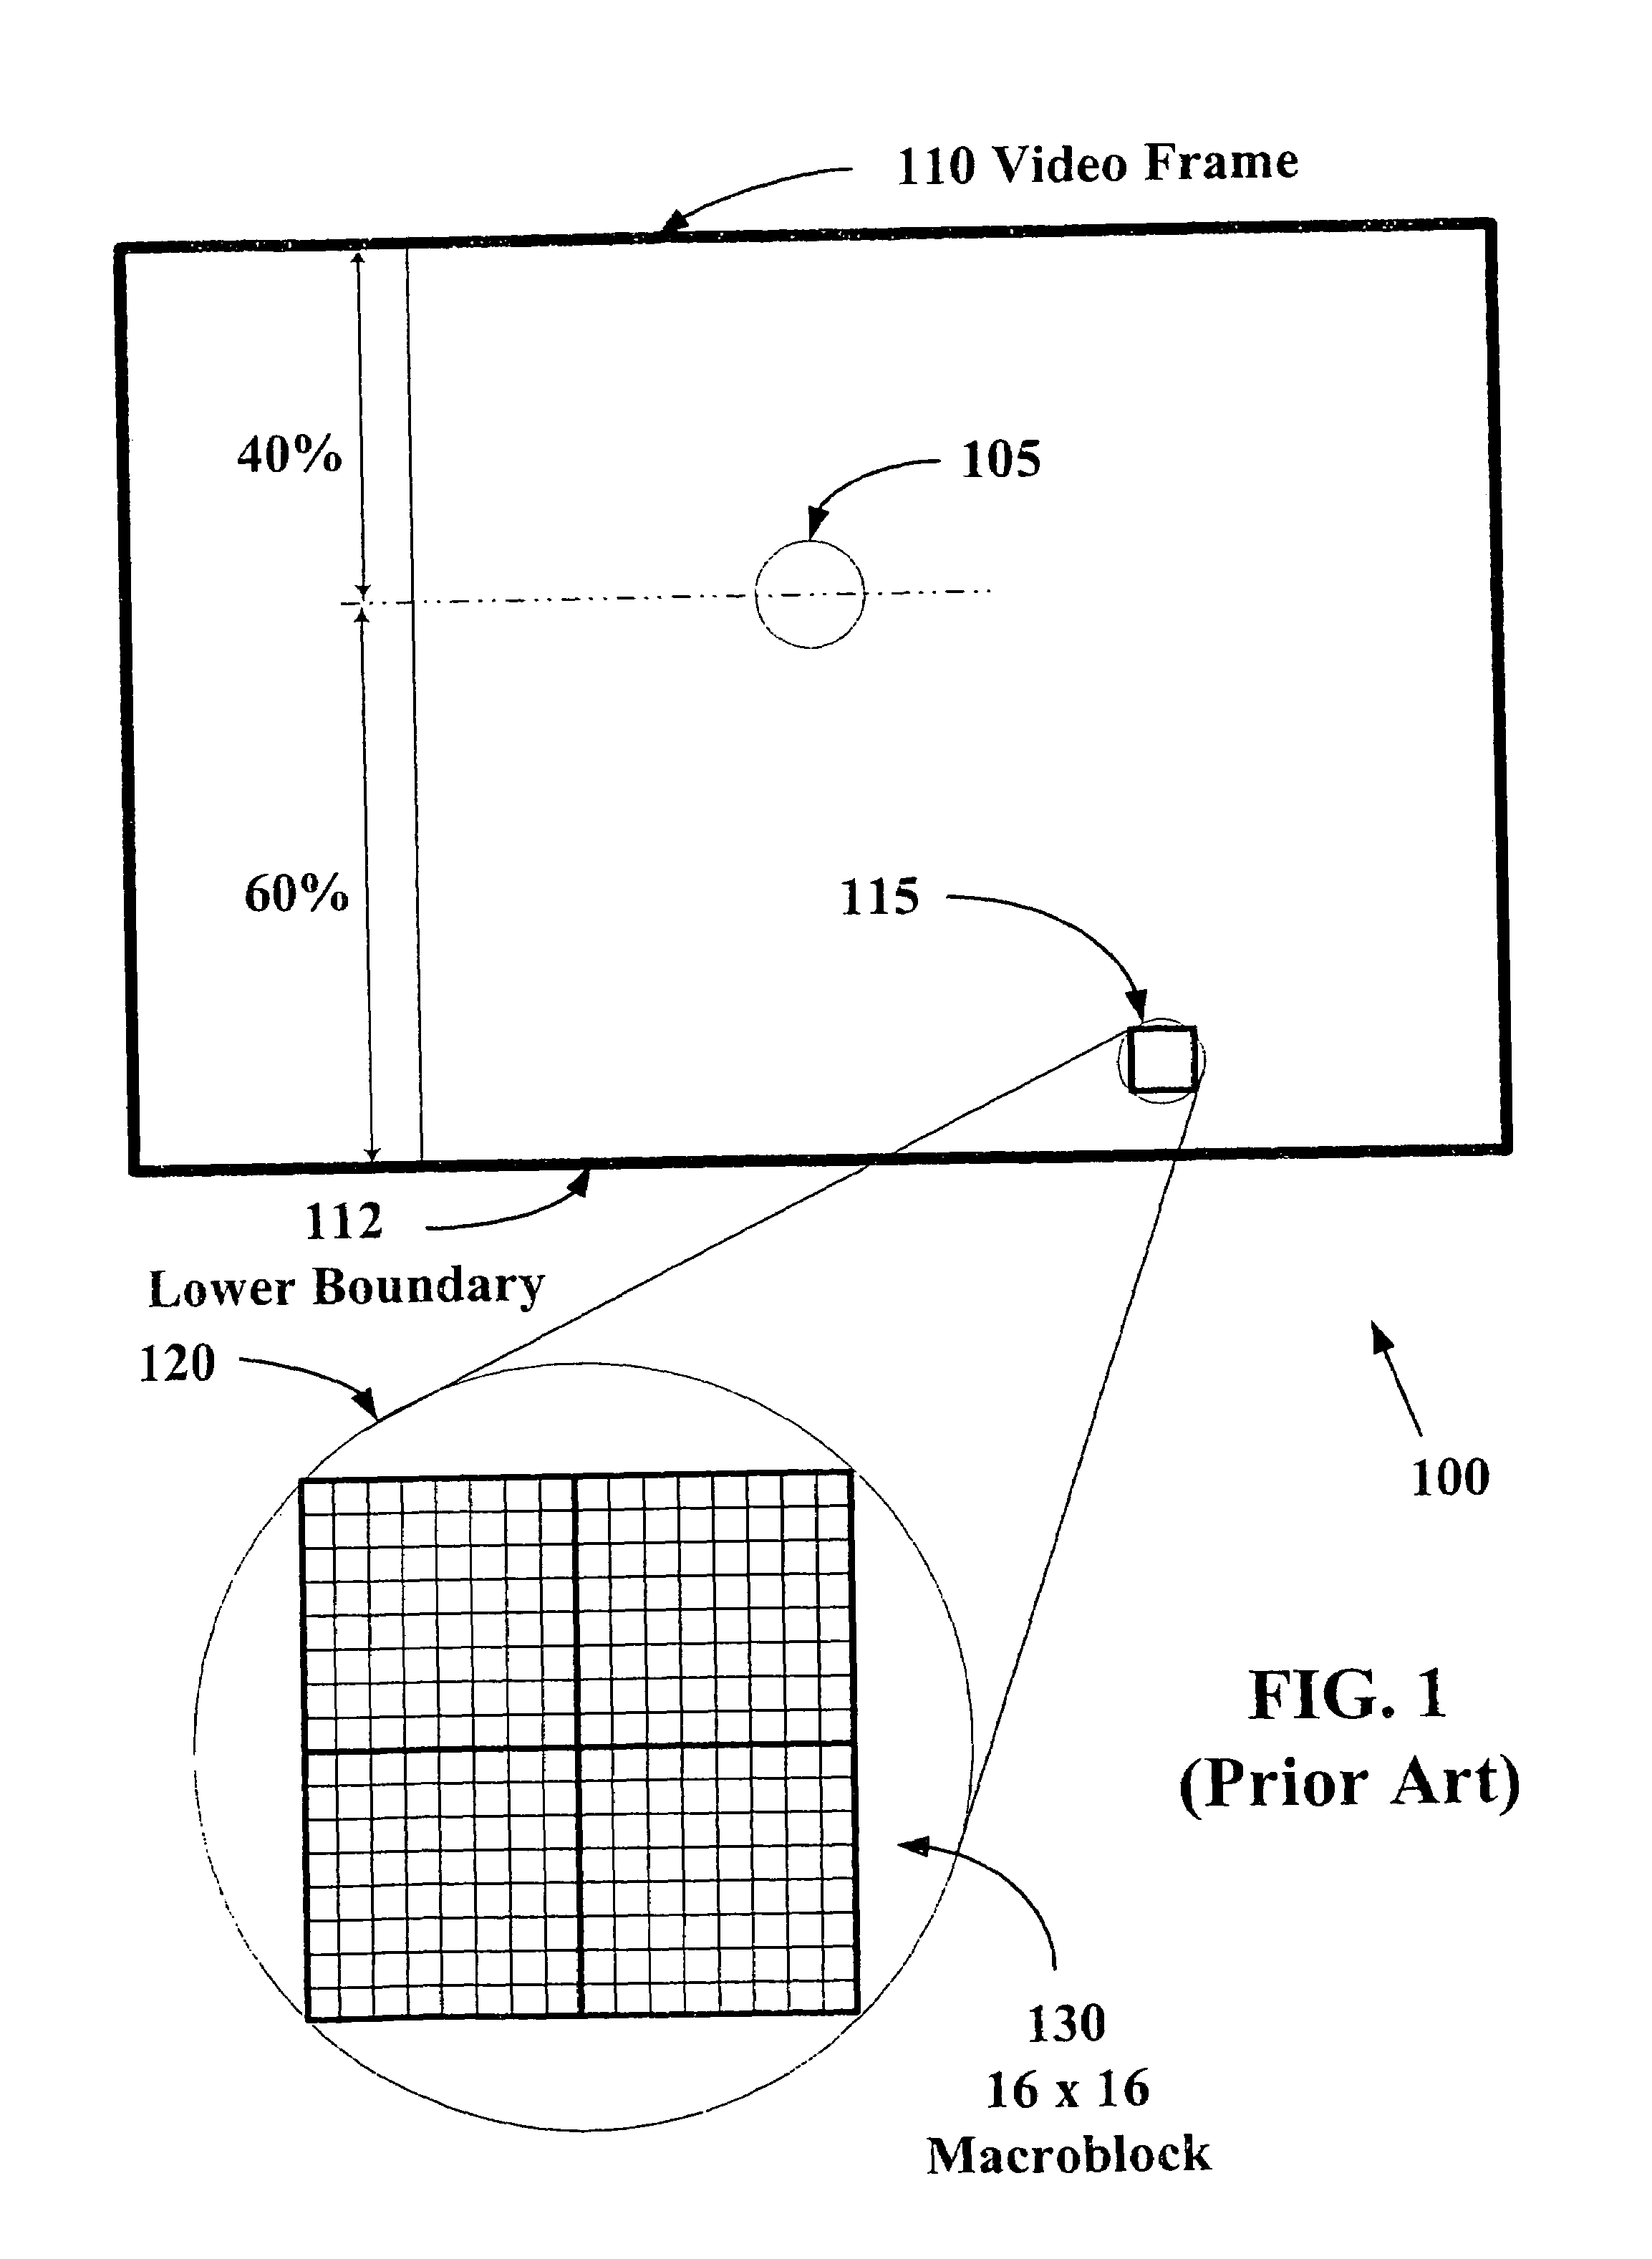 System and method for dynamic perceptual coding of macroblocks in a video frame